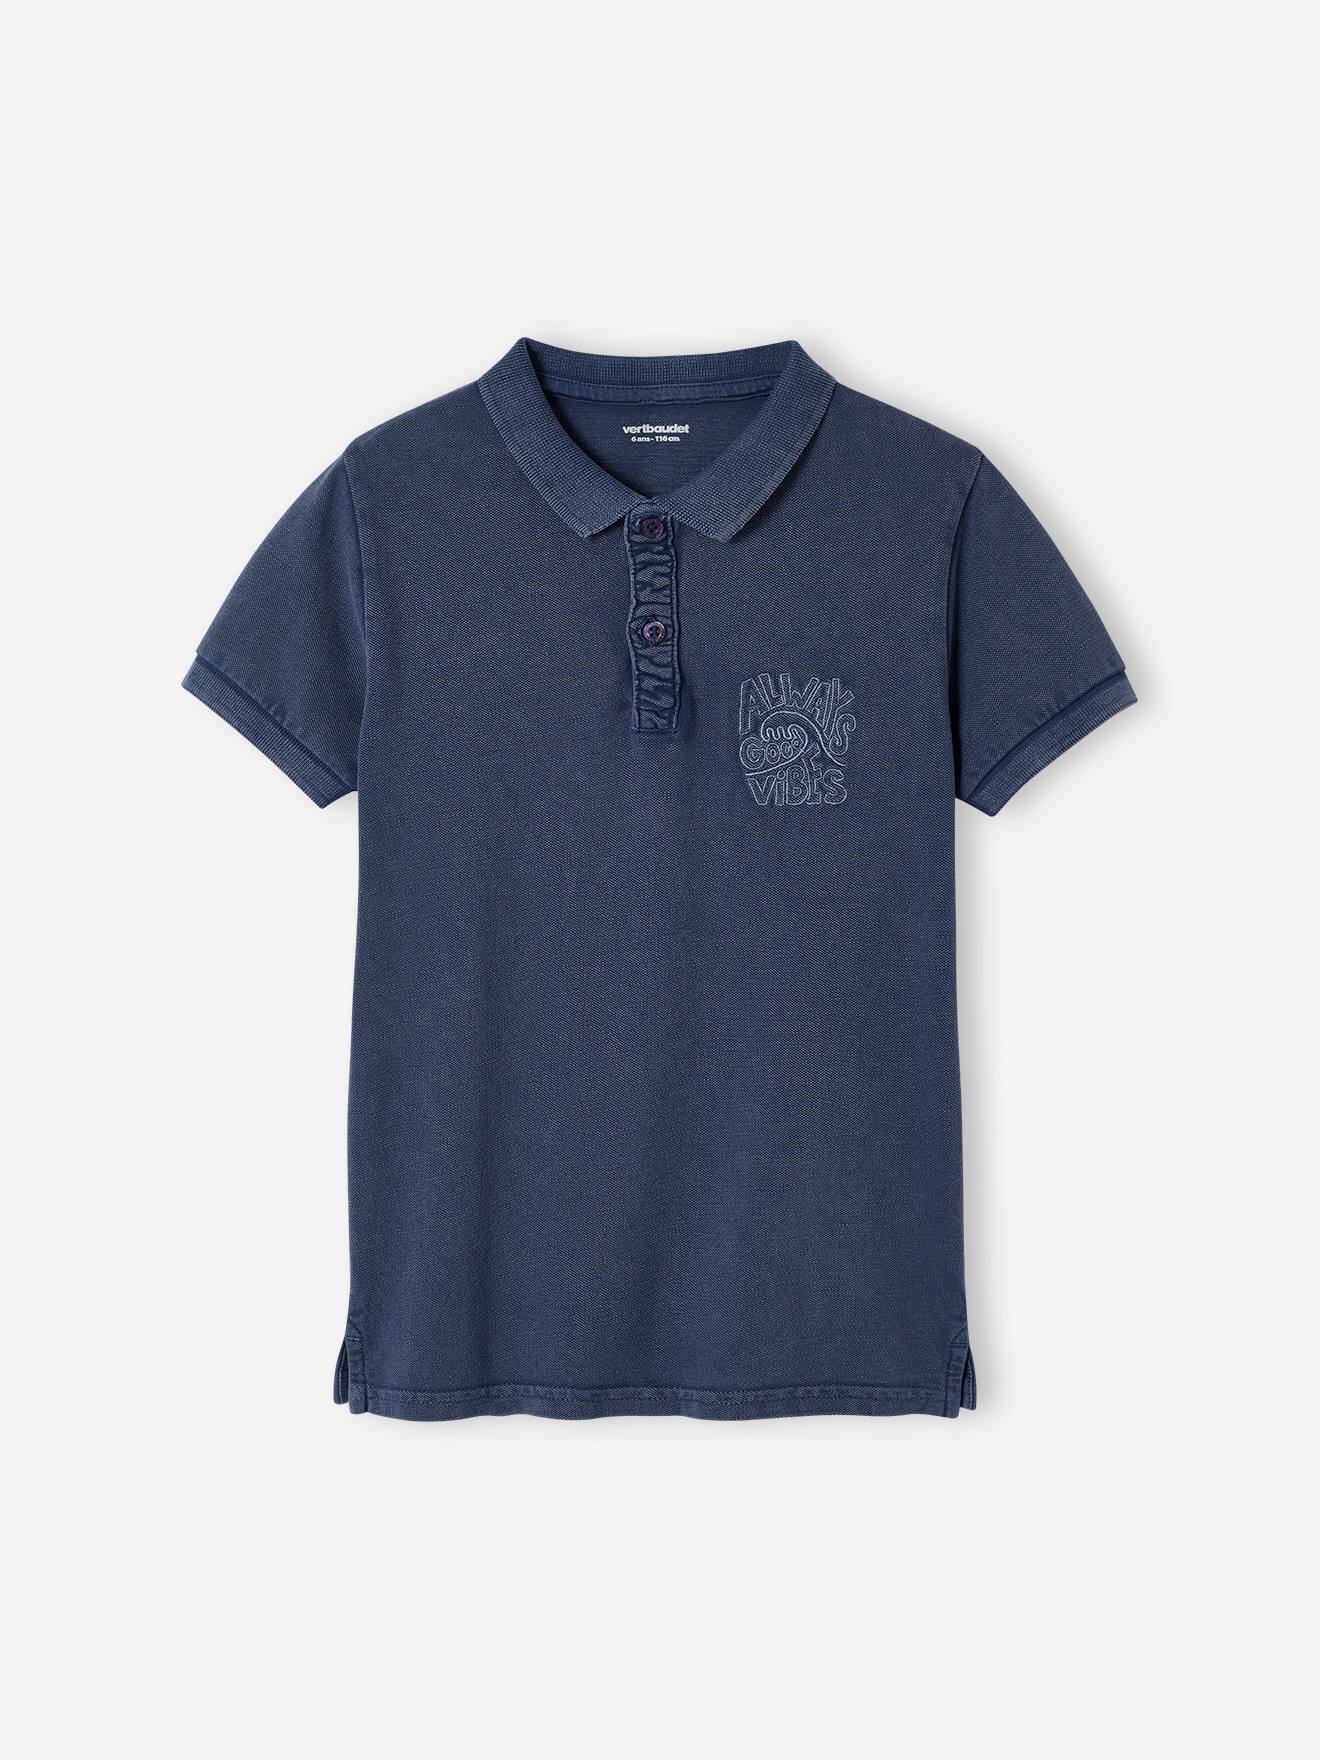 Polo Shirt with "good vibes" Embroidered on the Chest, for Boys slate blue